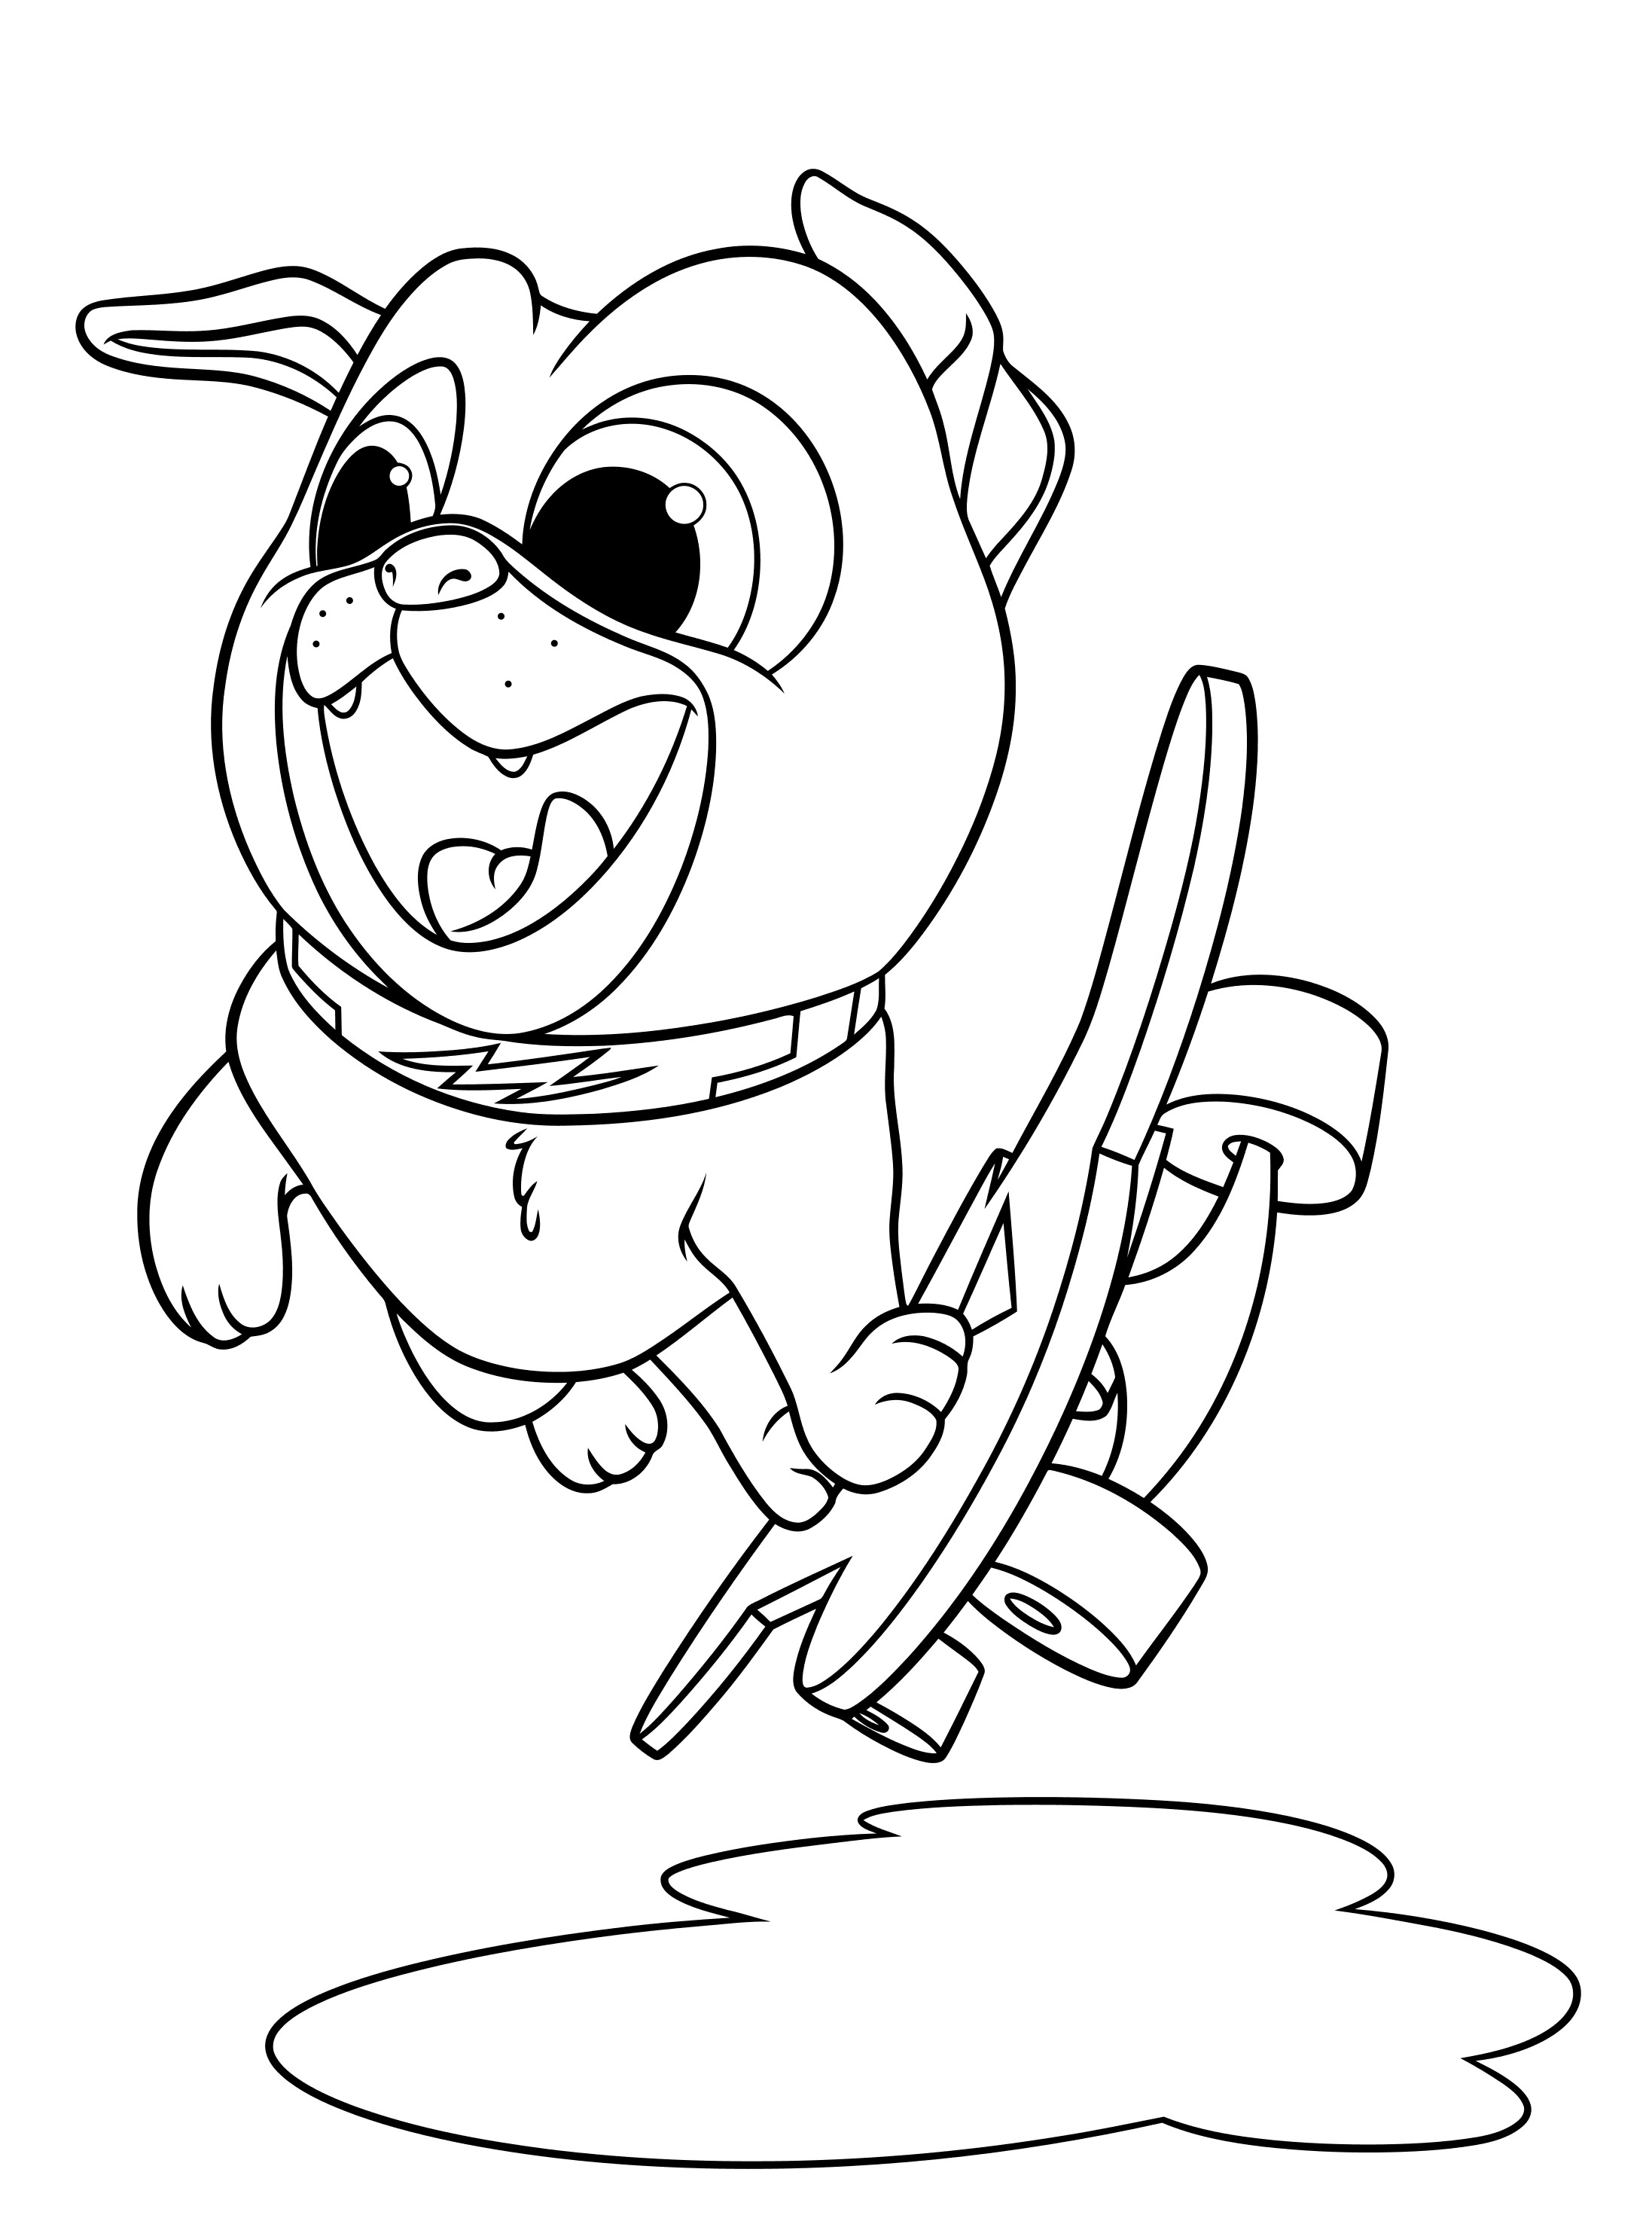 Puppy Dog Pals coloring pages to download and print for free